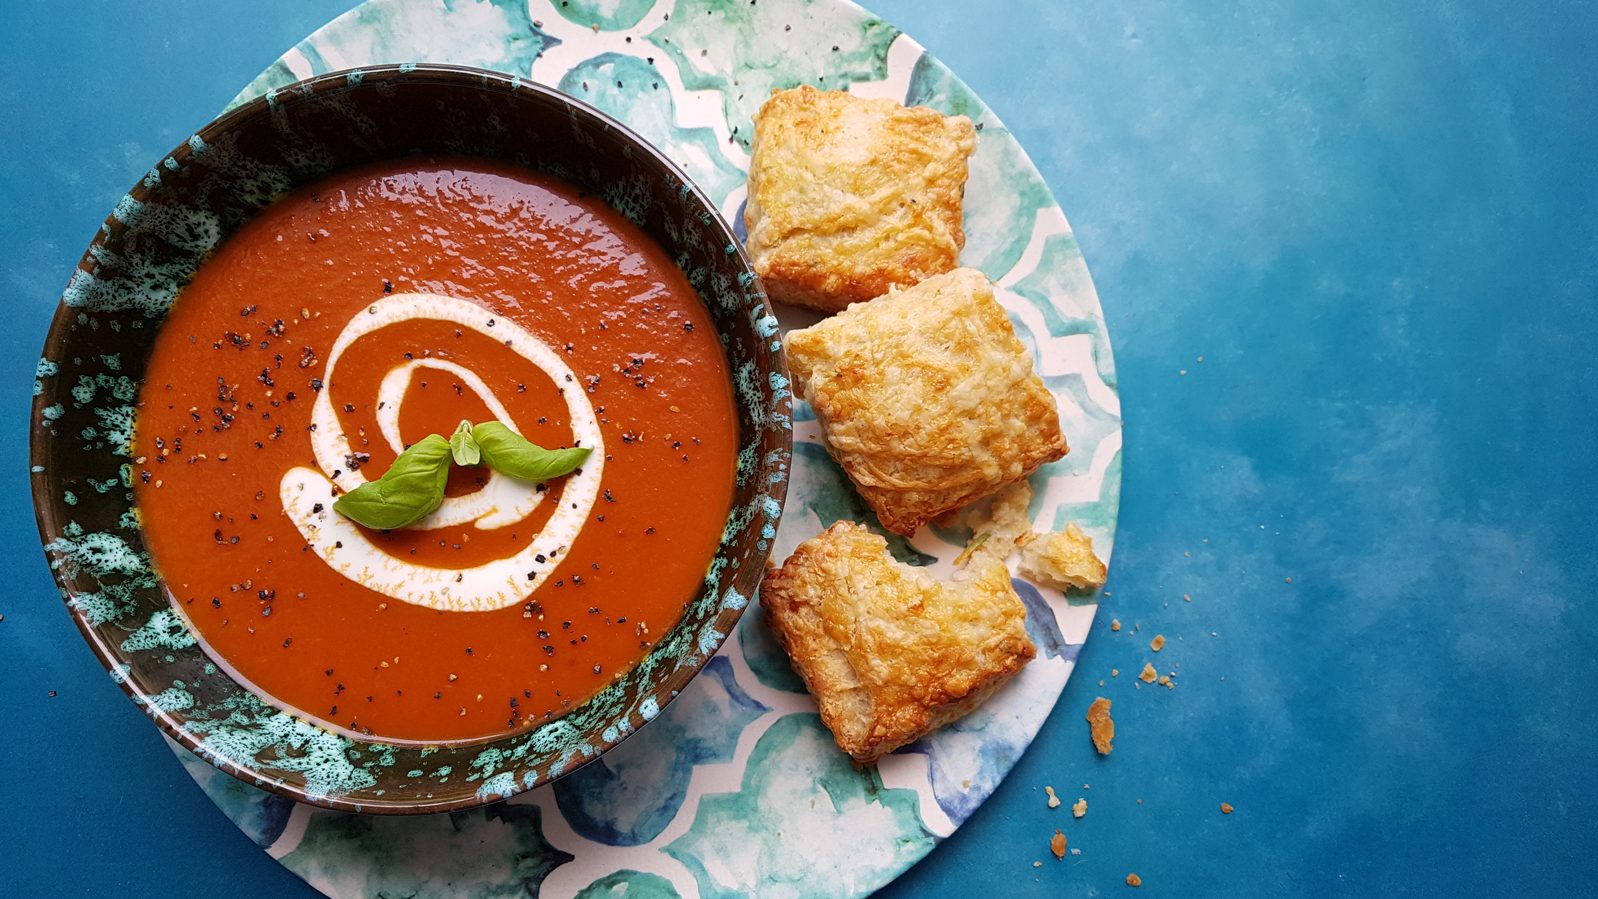 Tomato soup with cheese scones on a brightly patterned plate